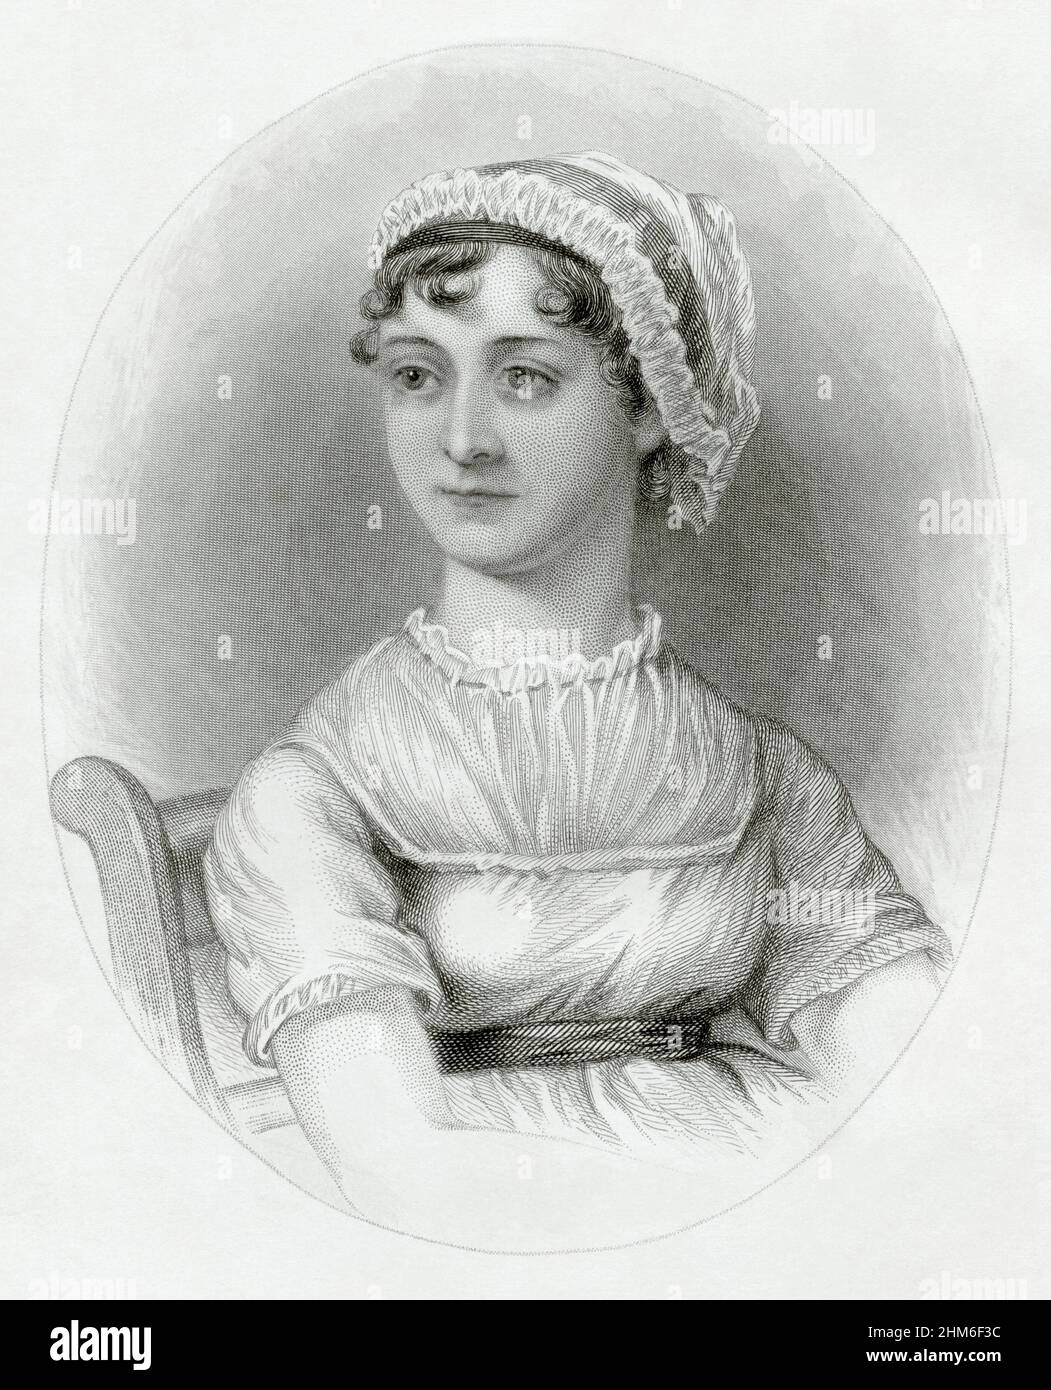 A portrait of the English writer Jane Austen, author of Pride and Prejudice. It is based on the sketch made in 1810 (when Jane was 35 yrs old) by her sister Cassandra. Stock Photo